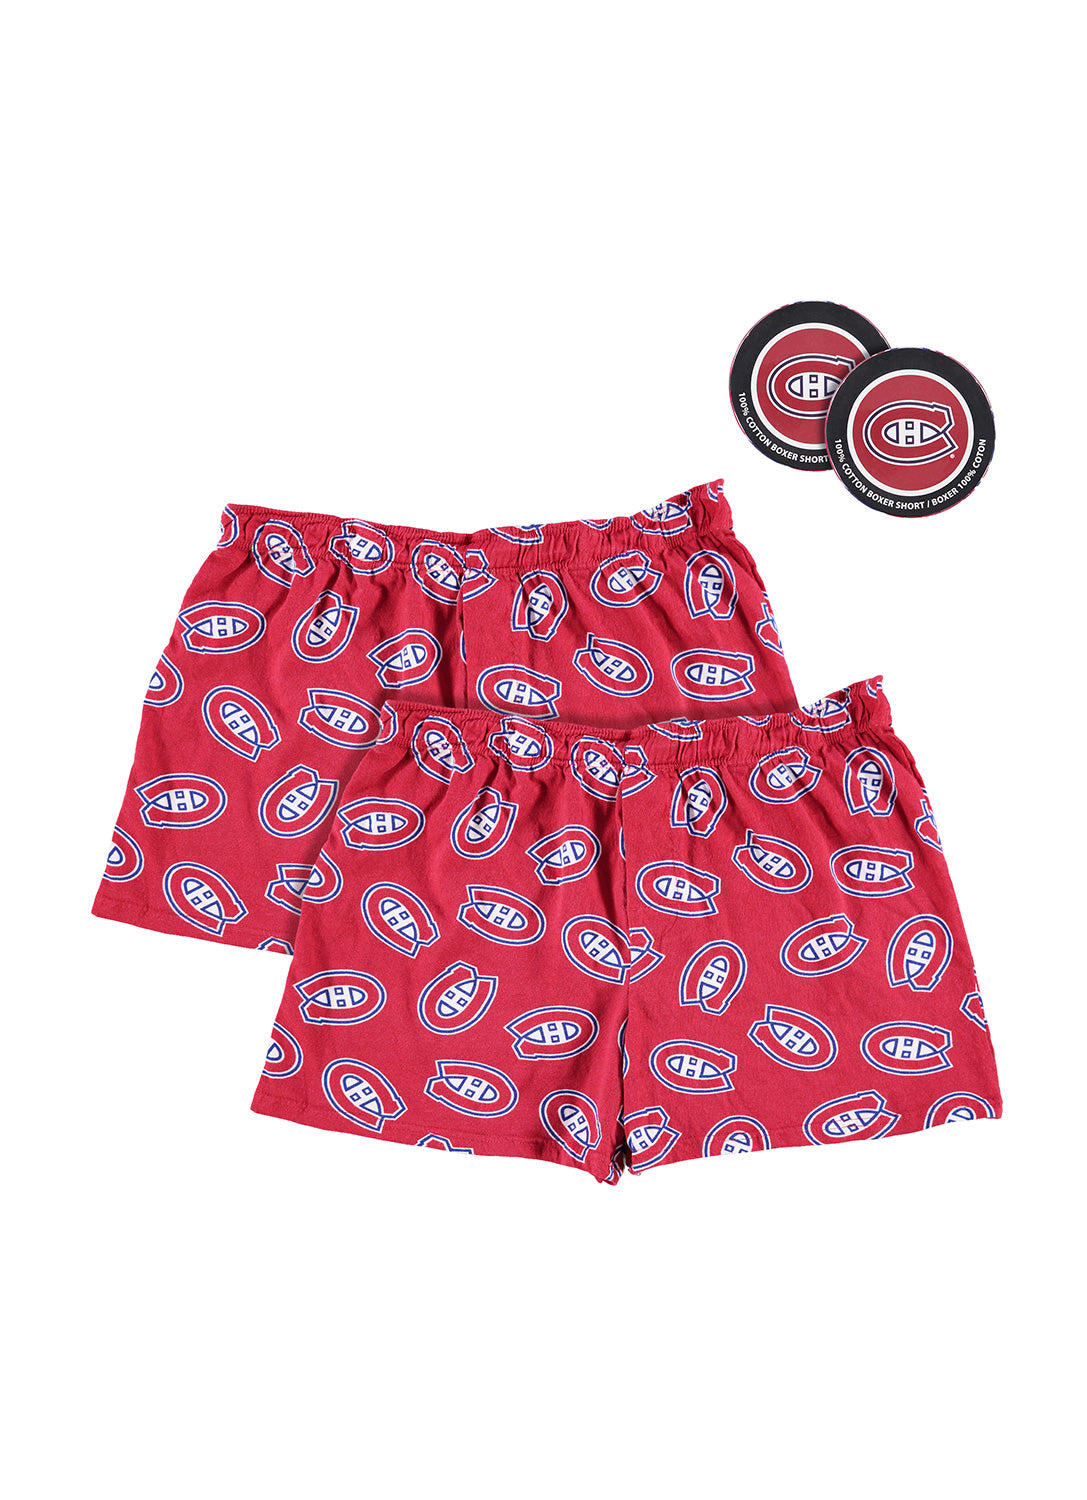 Pair of mens boxers with Montreal Canadiens print (red)